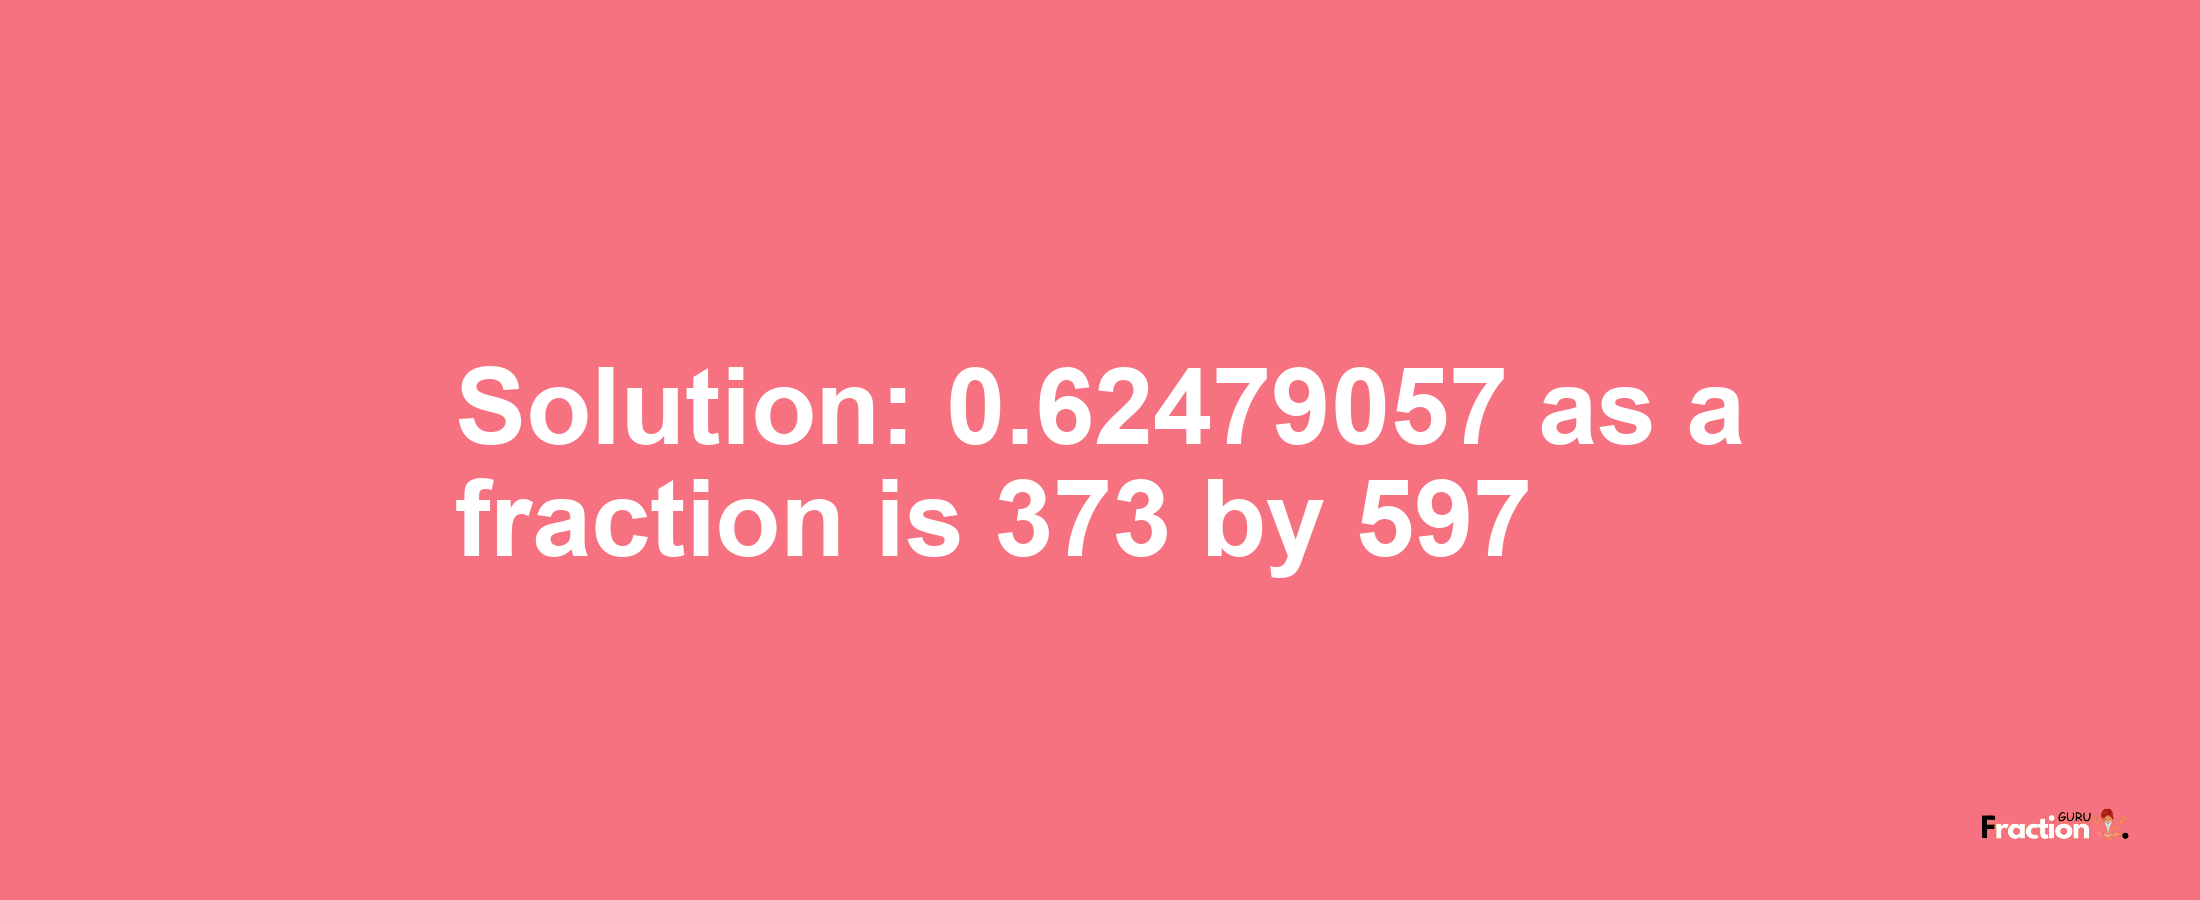 Solution:0.62479057 as a fraction is 373/597